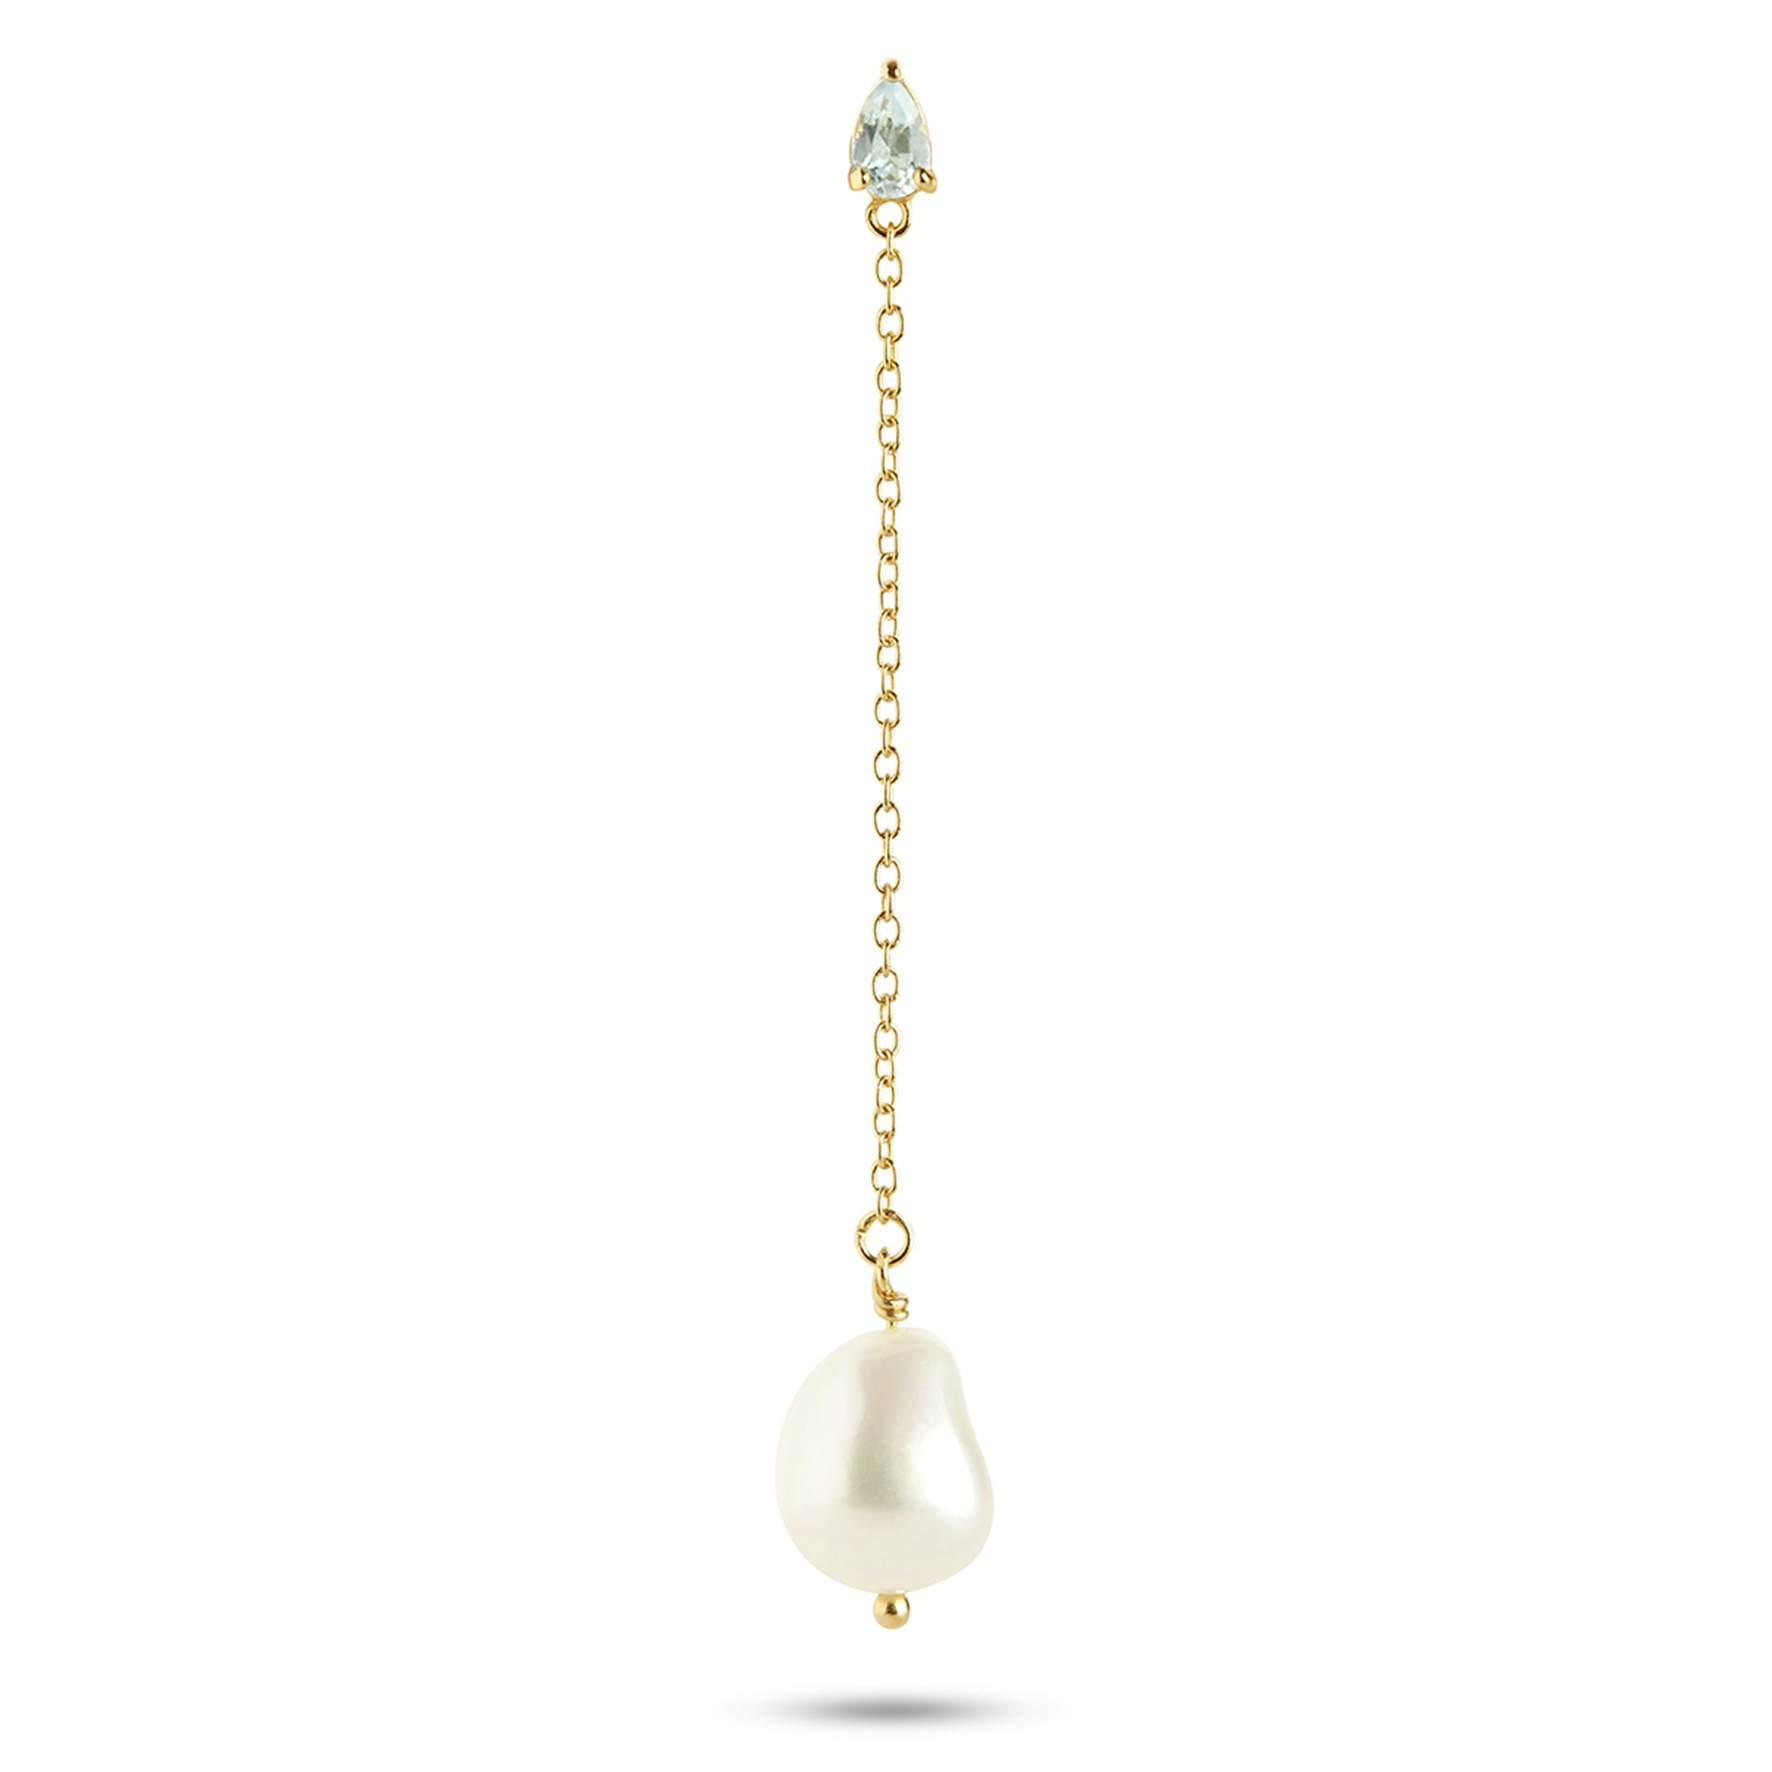 Gem Candy Long Chain Earring Aqua from Carré in Goldplated-Silver Sterling 925|, Freshwater Pearl